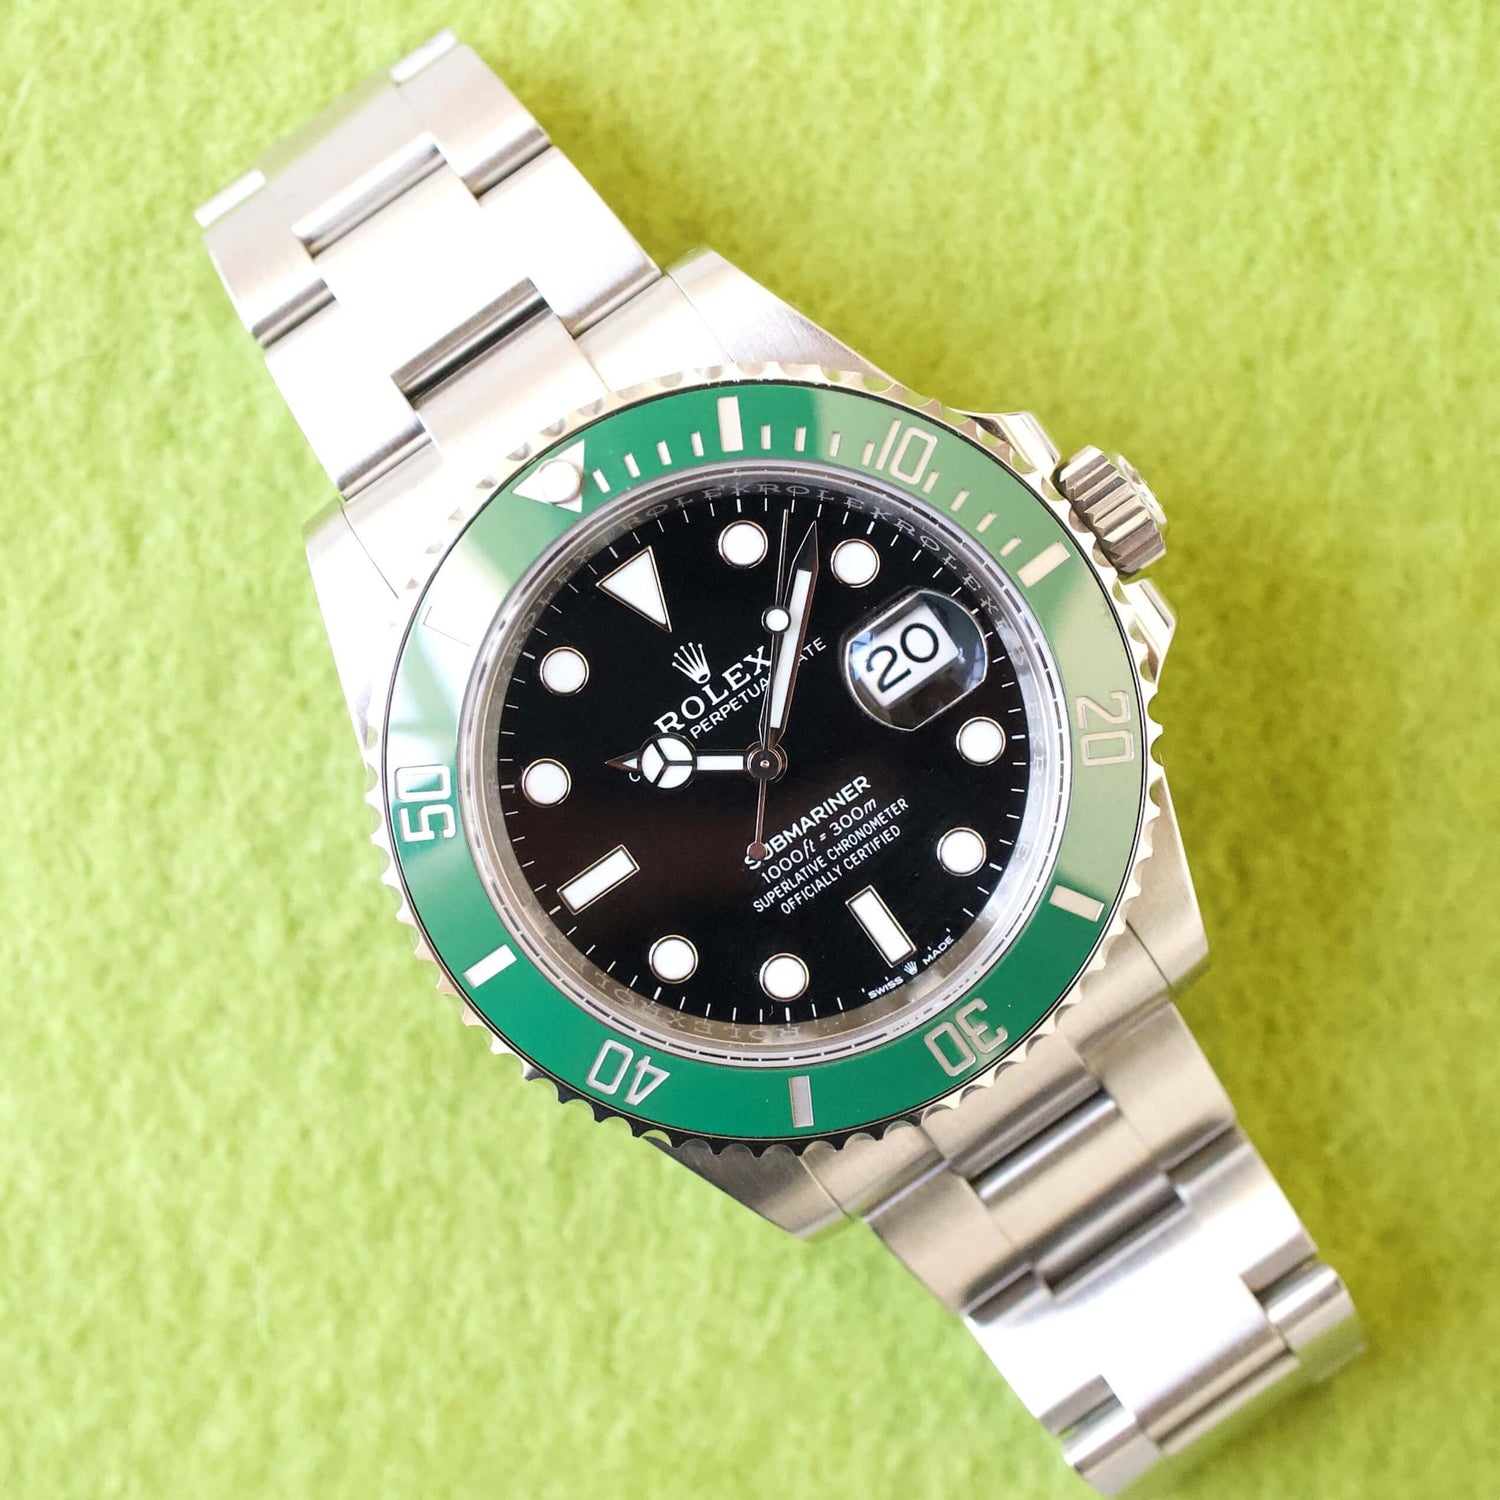 Rolex Submariner Date 126610LV Starbucks 41MM Factory Rolex Warranty Box Papers Guaranteed Authentic